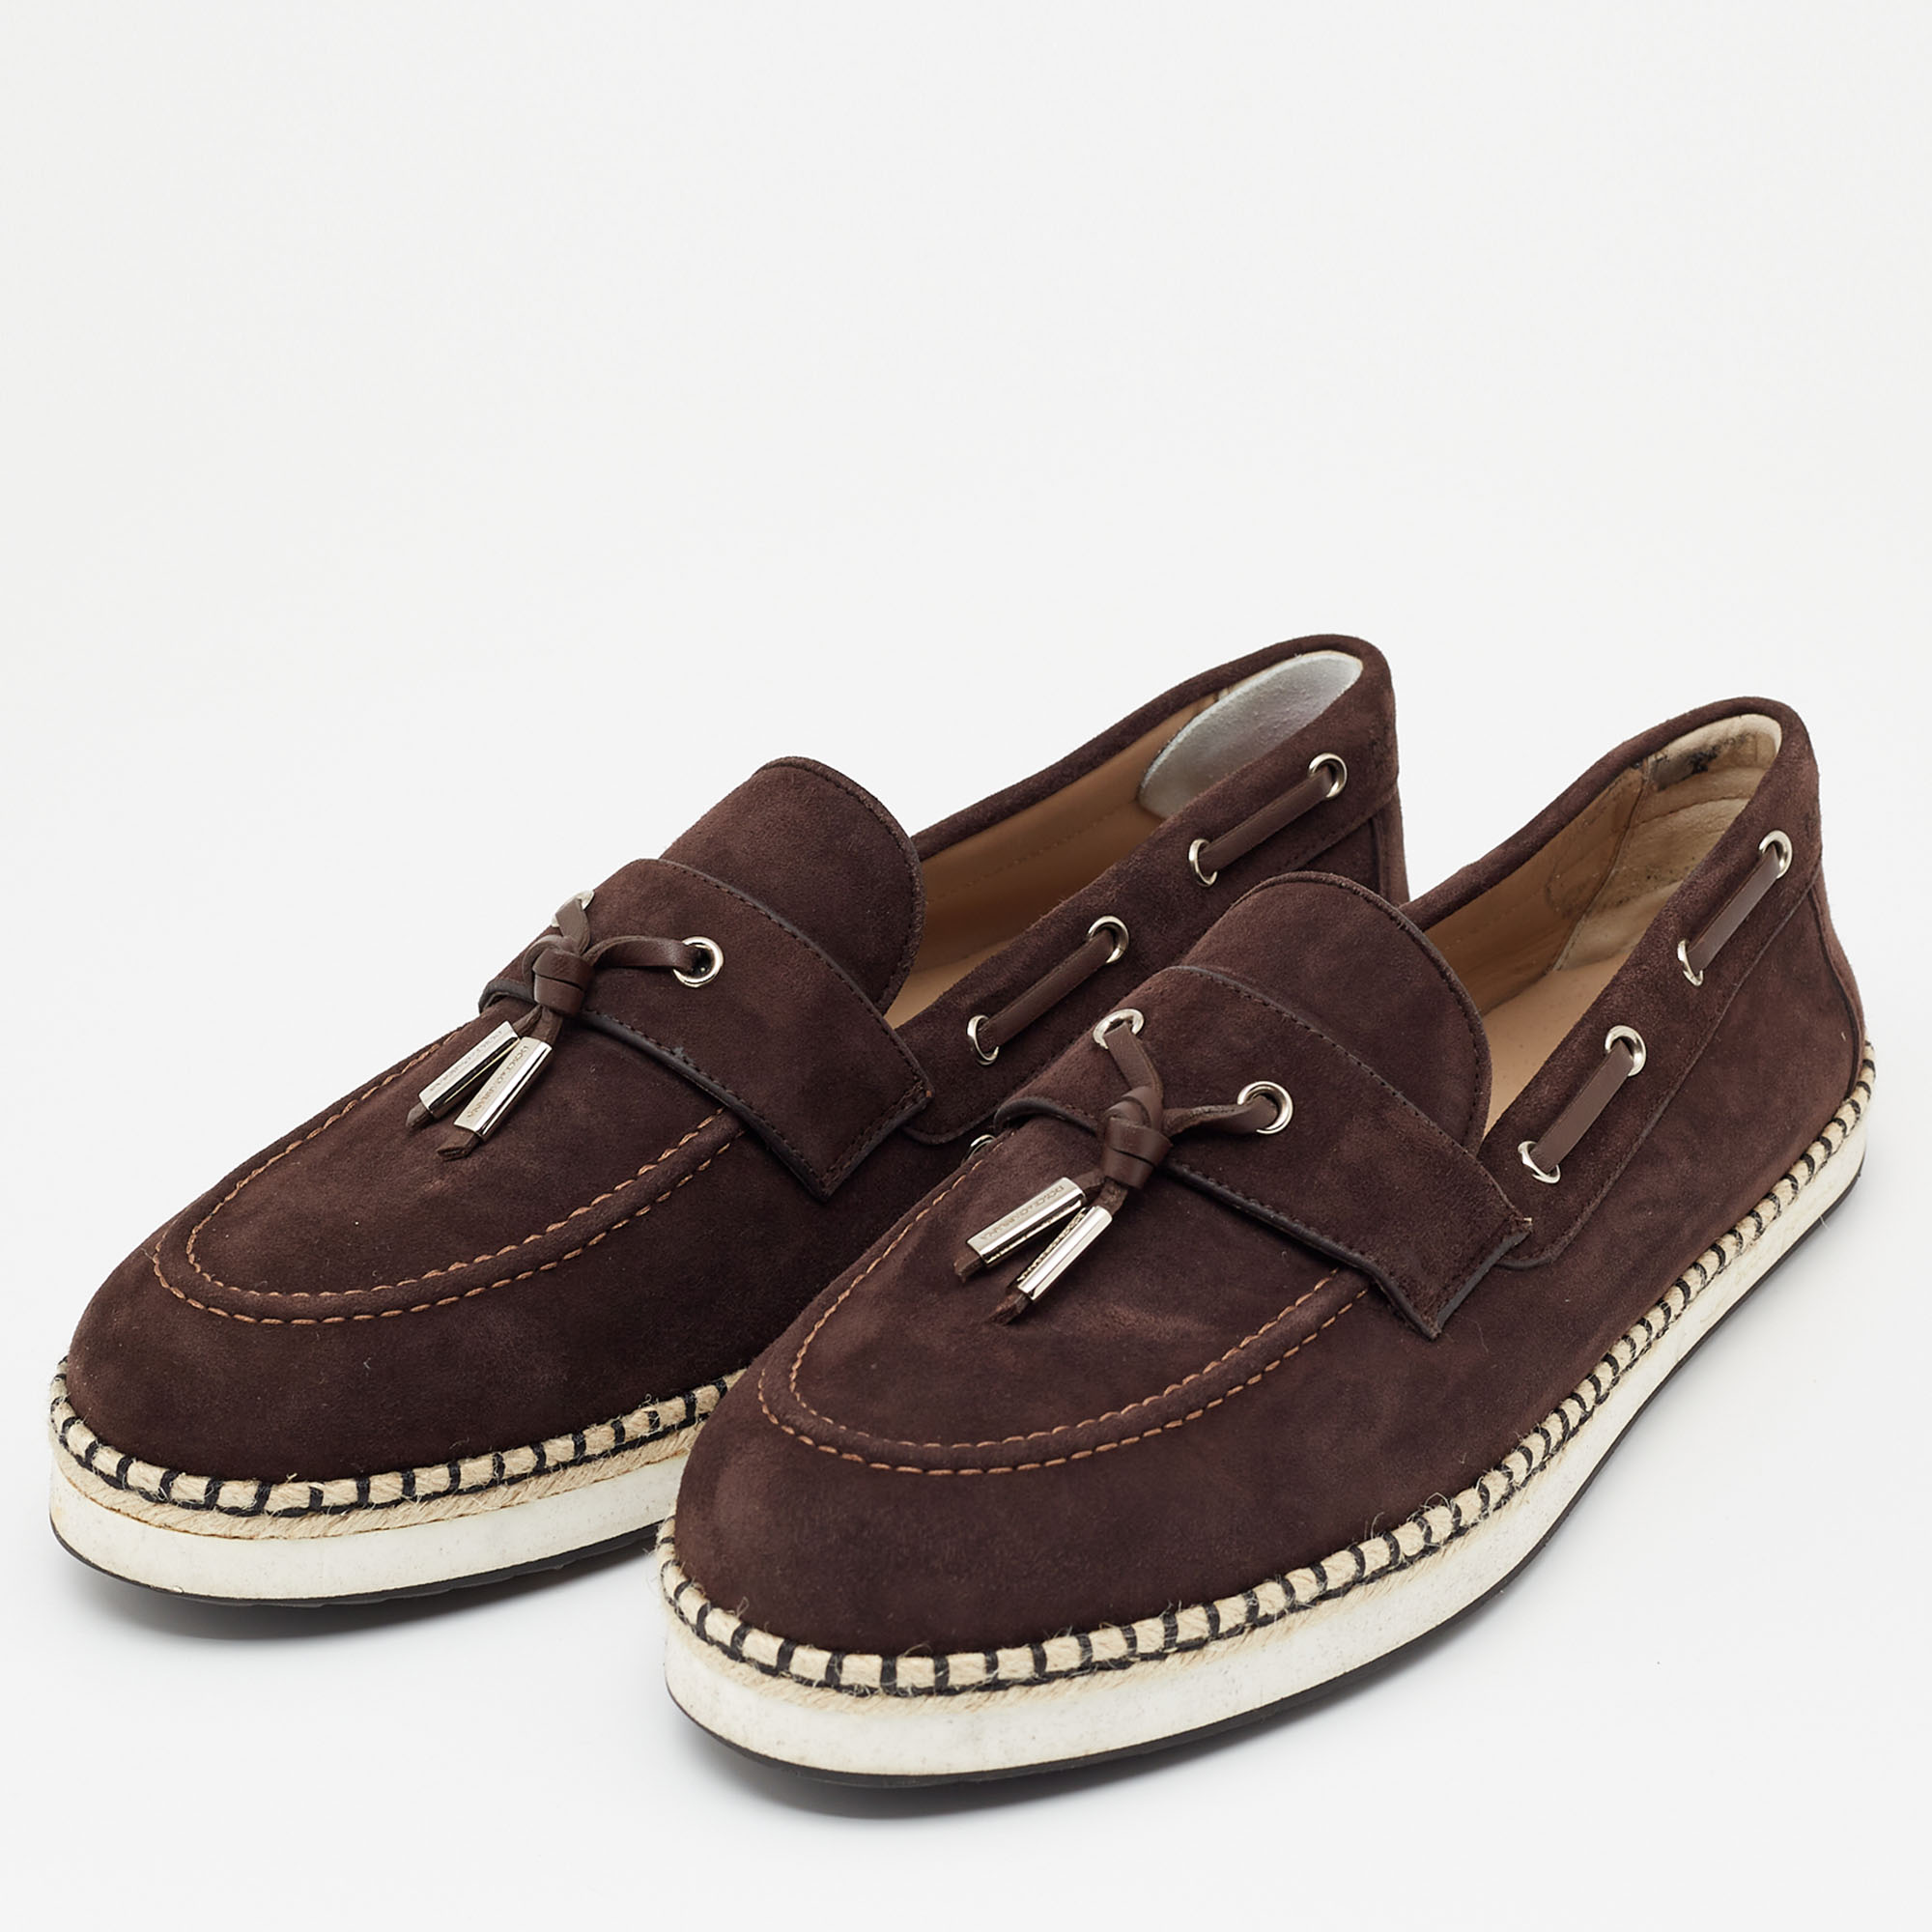 

Dolce & Gabbana Brown Suede Slip On Espadrille Loafers Size